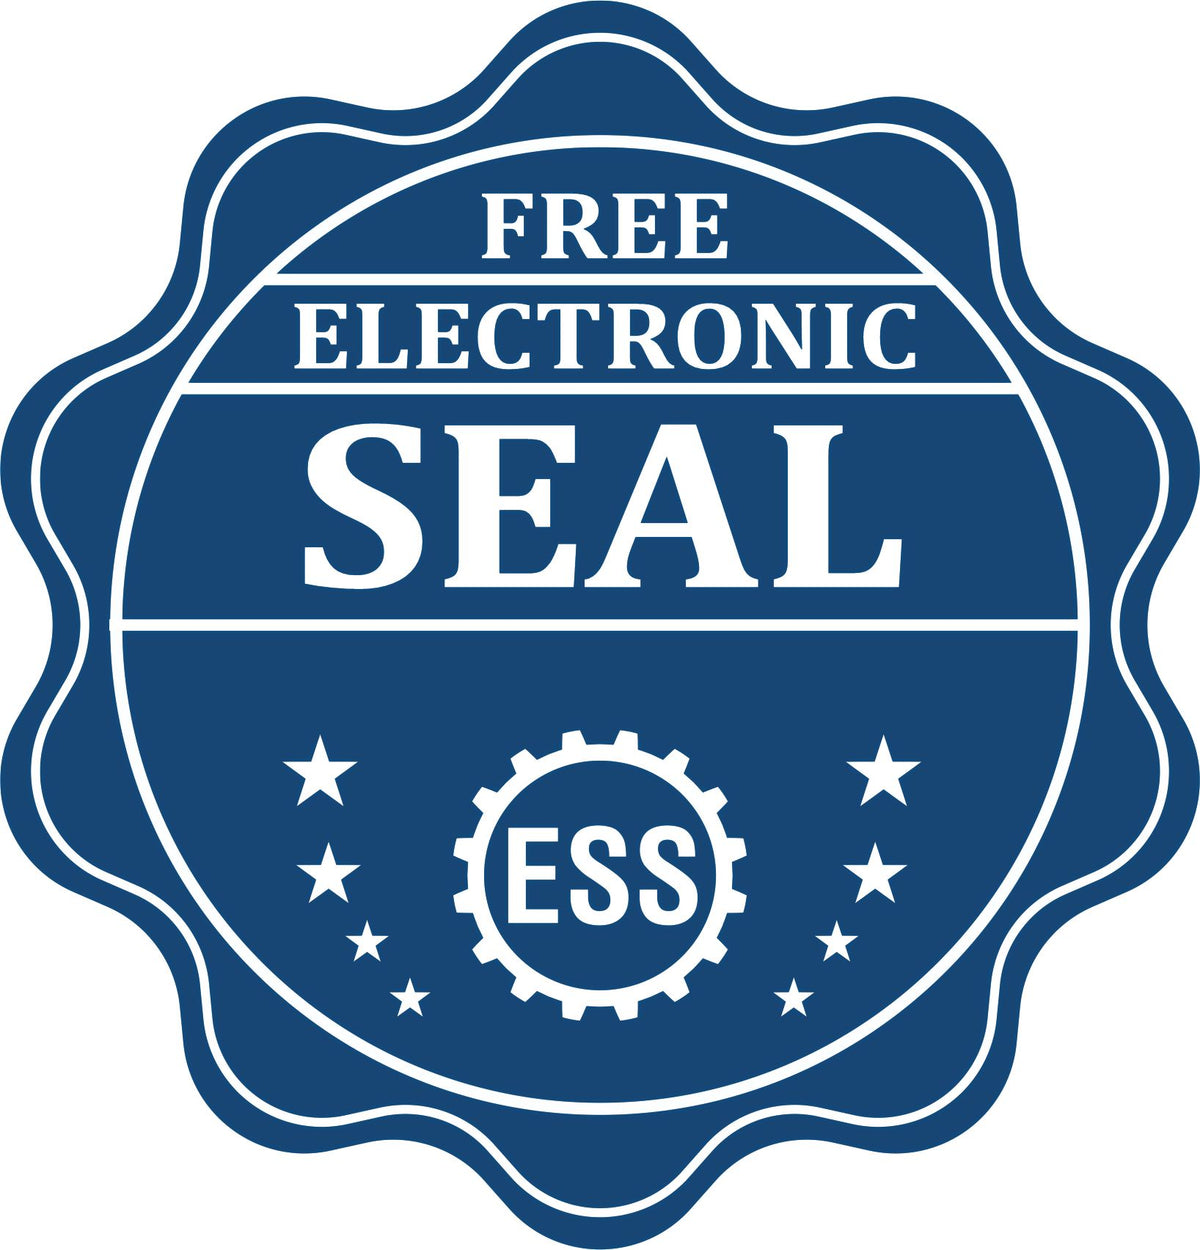 A badge showing a free electronic seal for the Hybrid Guam Engineer Seal with stars and the ESS gear on the emblem.